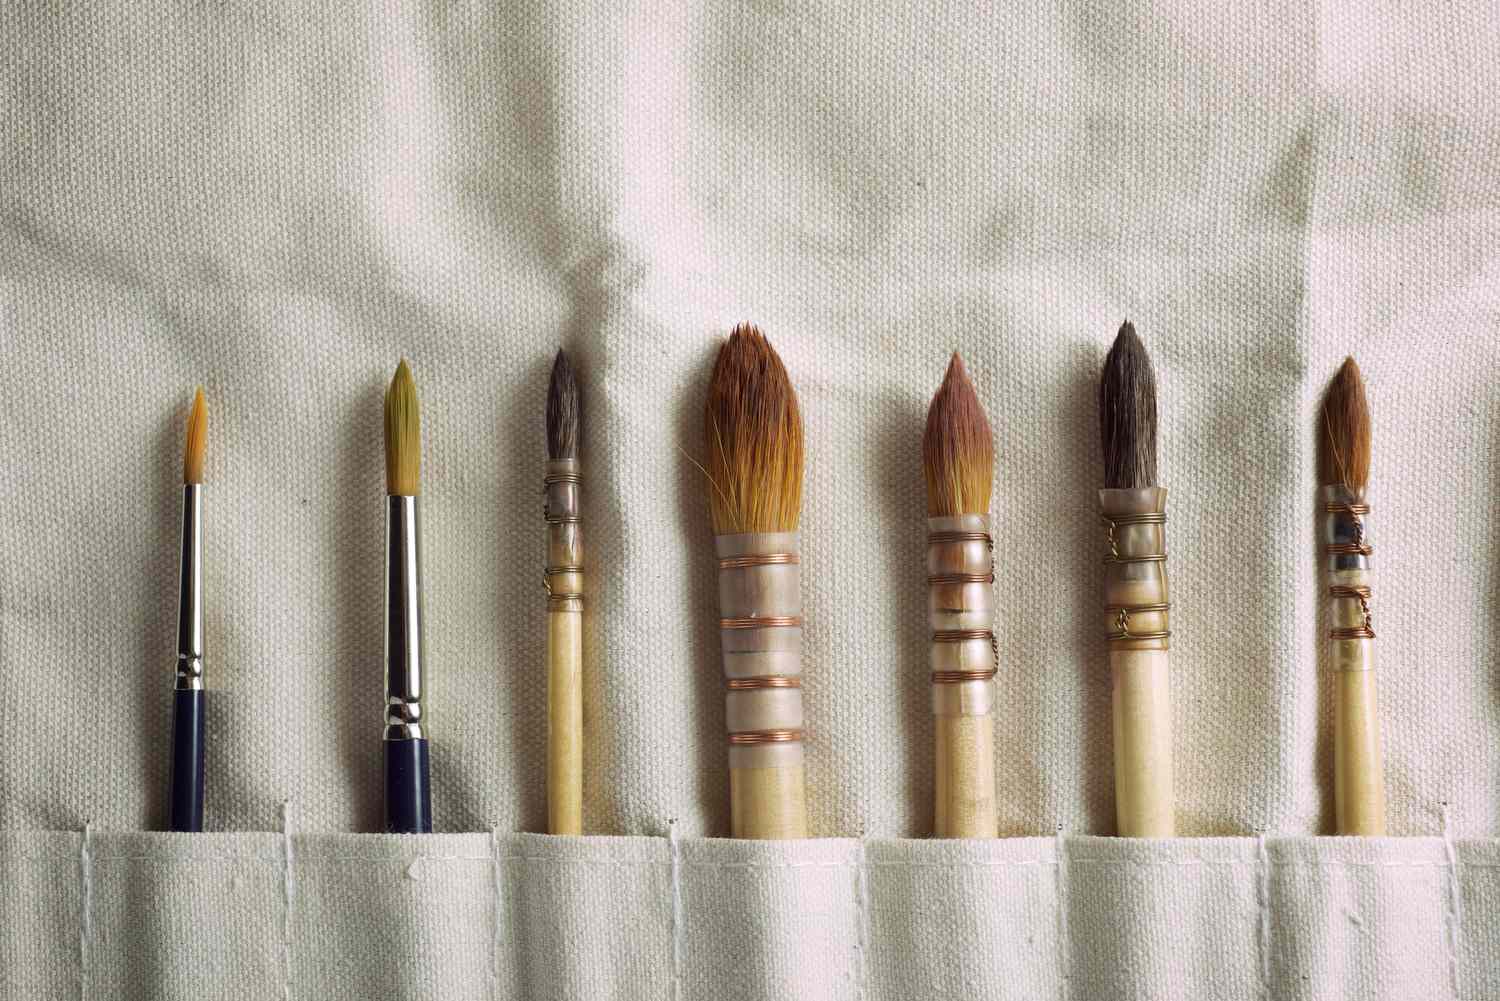 How To Store A Paint Brush